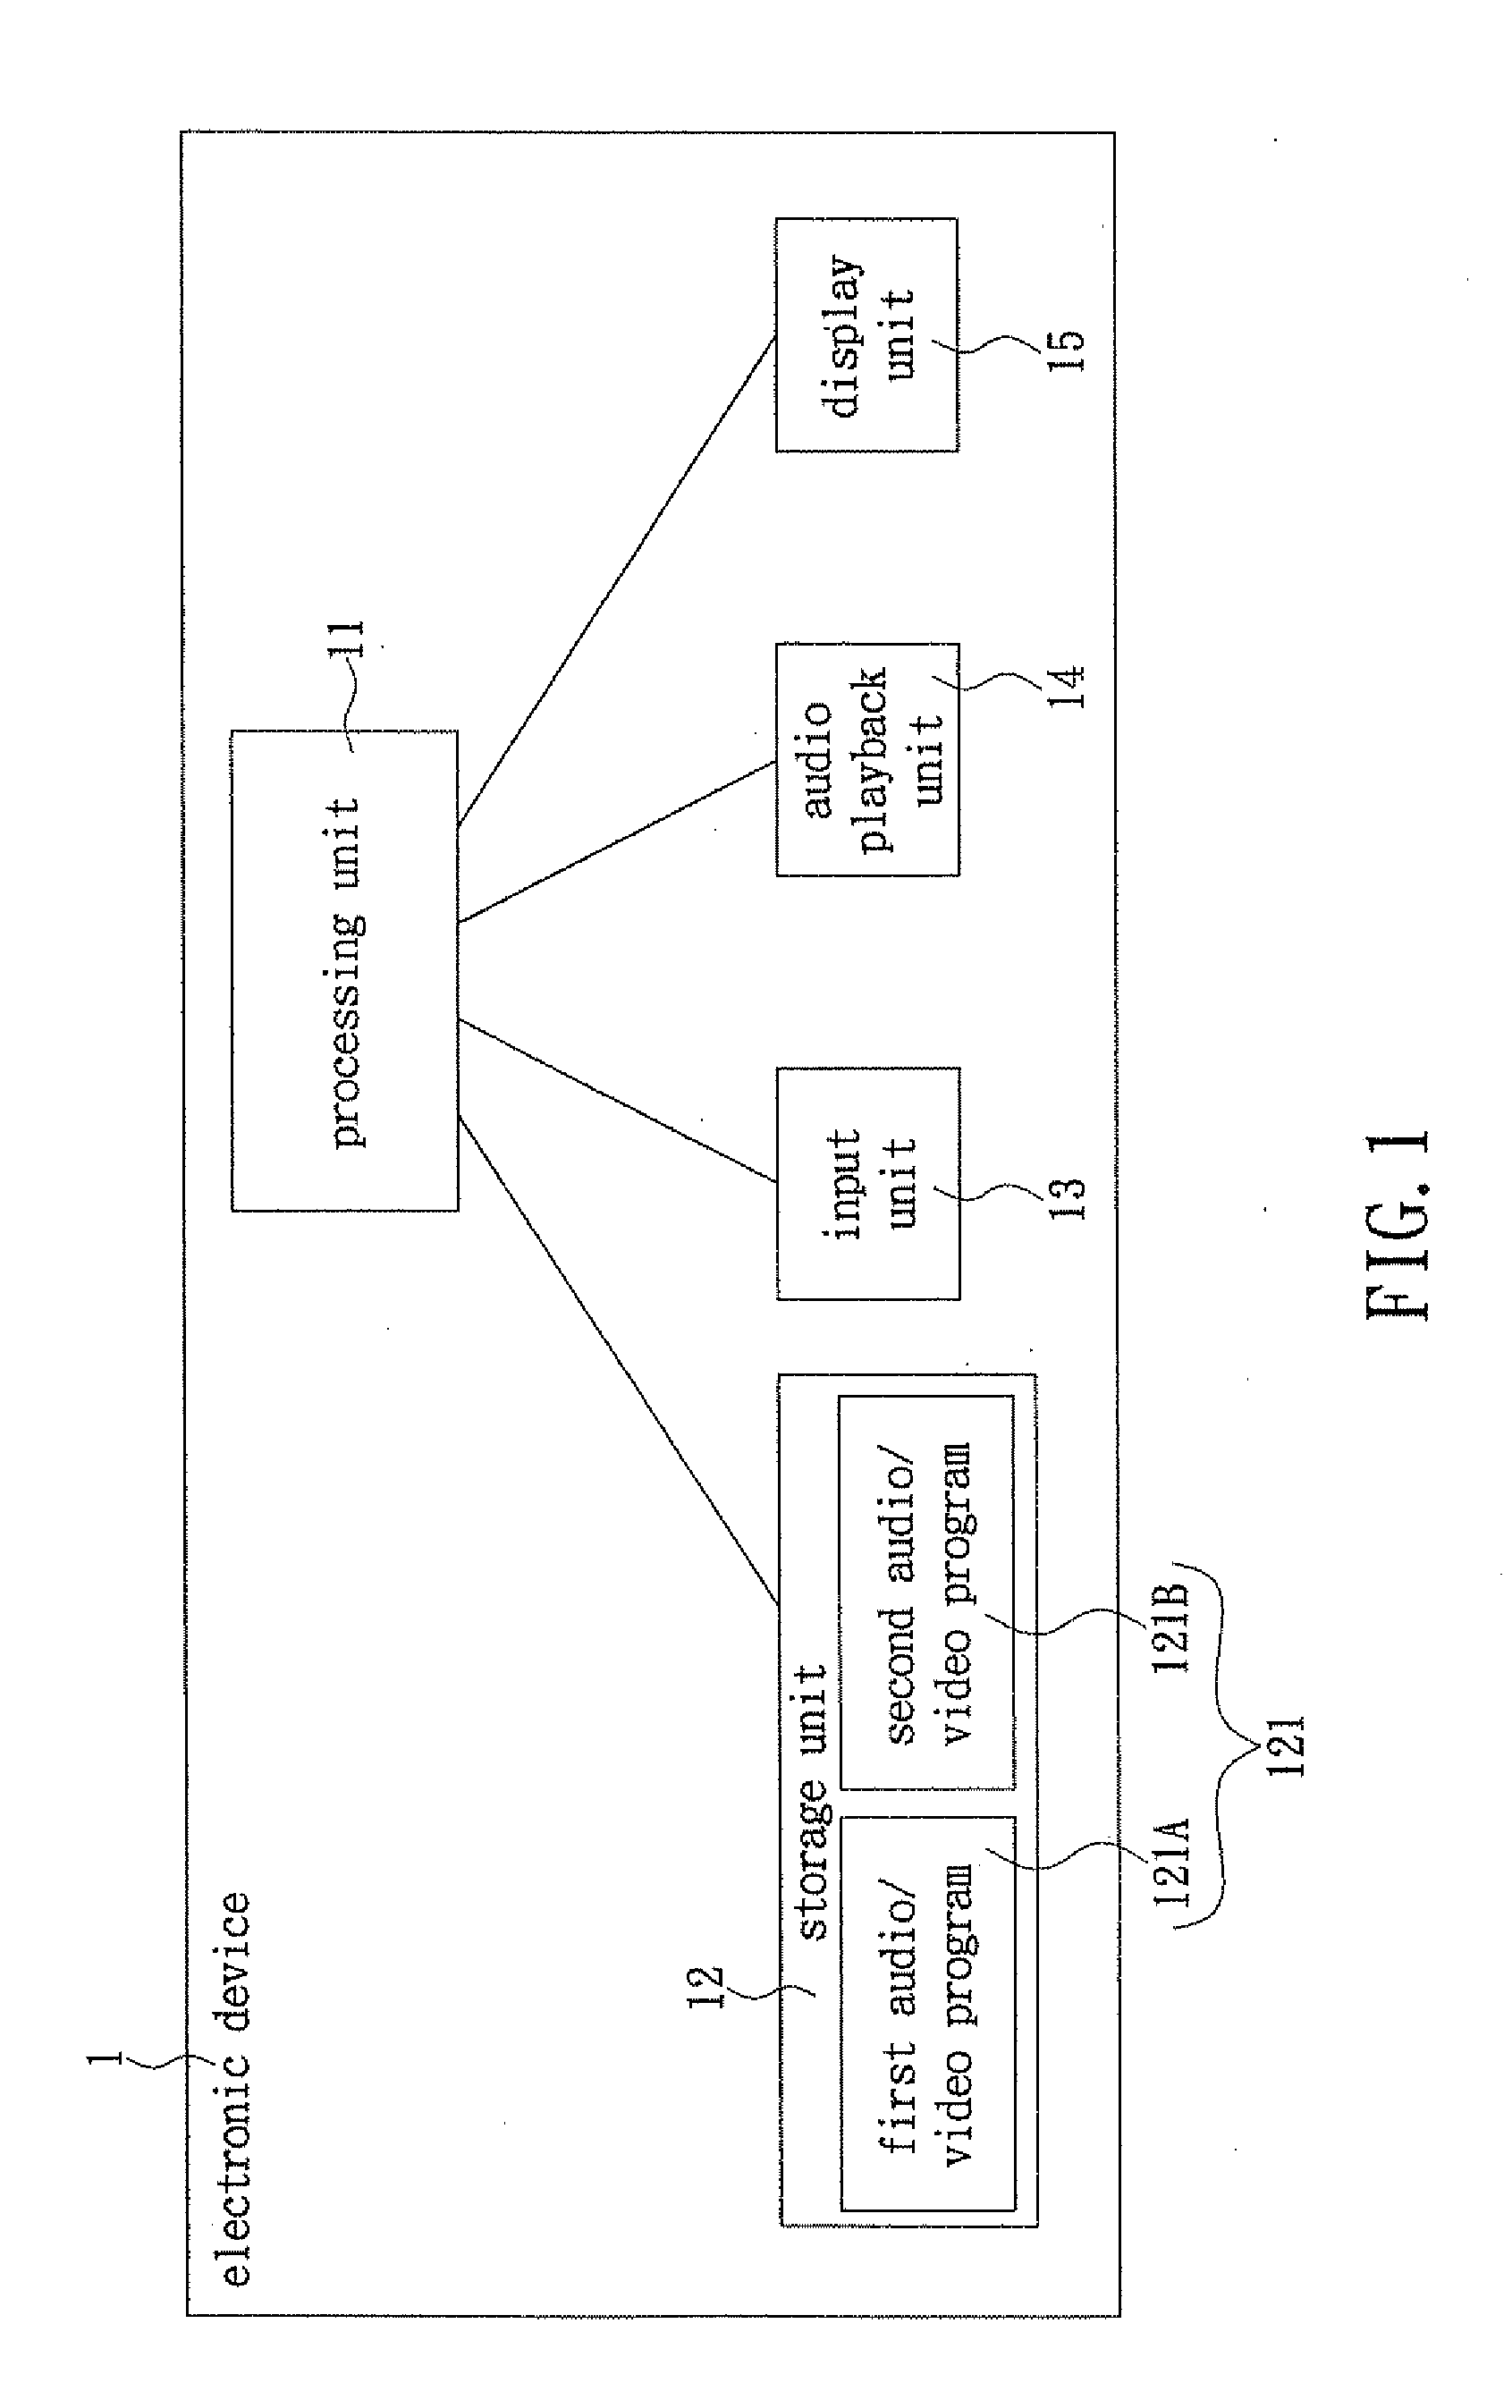 Method for switching audio playback between foreground area and background area in screen image using audio/video programs